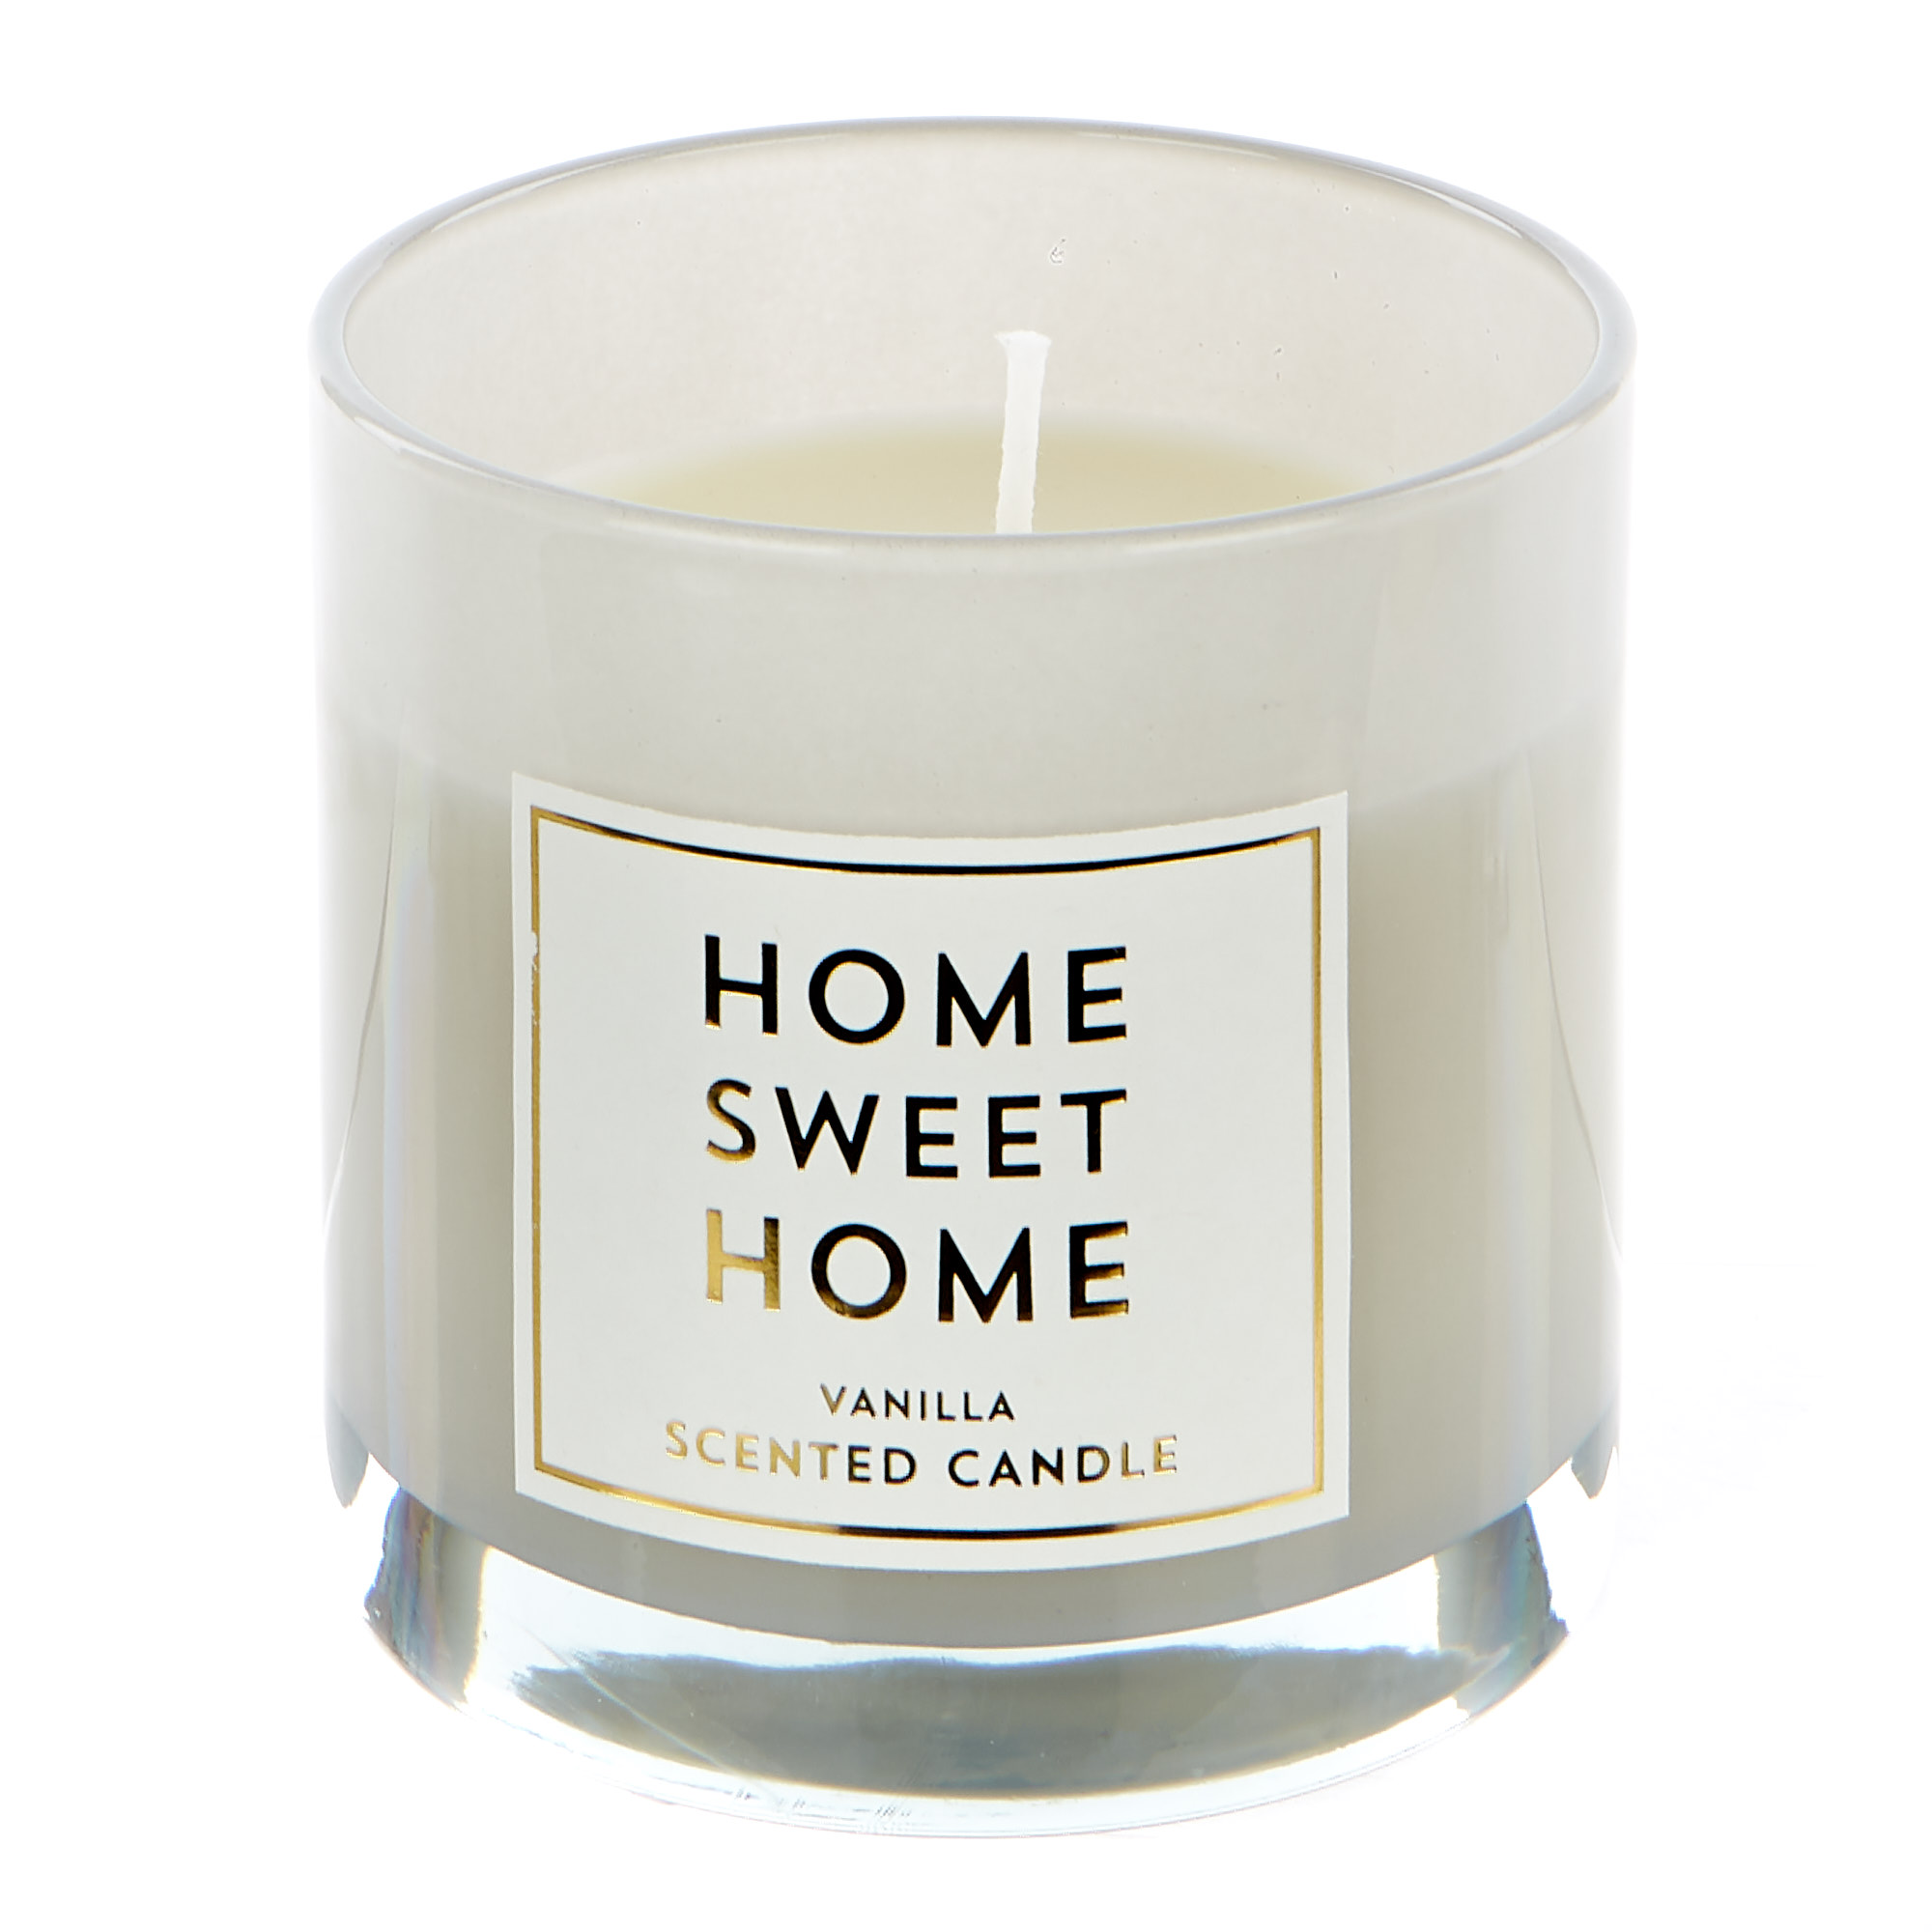 Home Sweet Home Vanilla Scented Celebration Candle